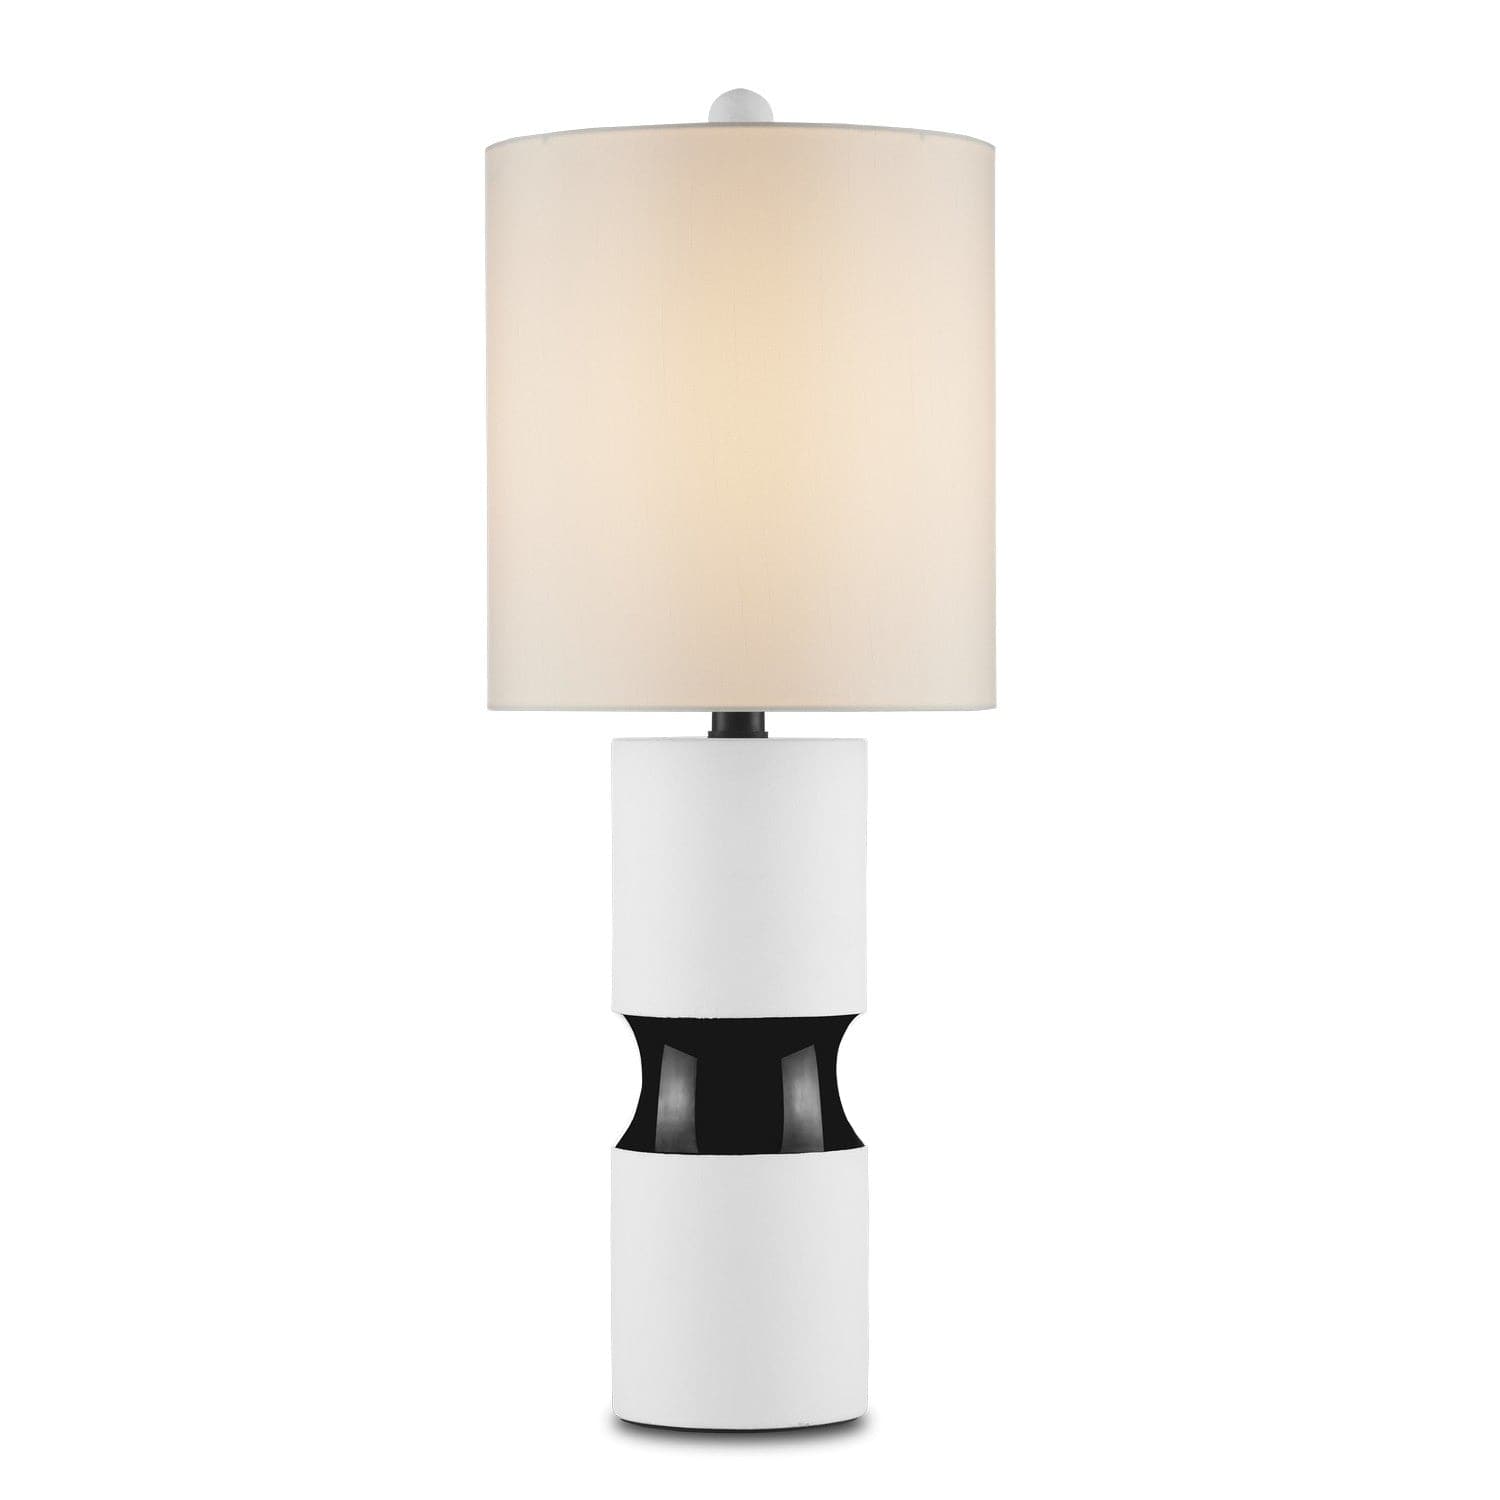 Currey and Company - 6000-0856 - One Light Table Lamp - Off White/Black